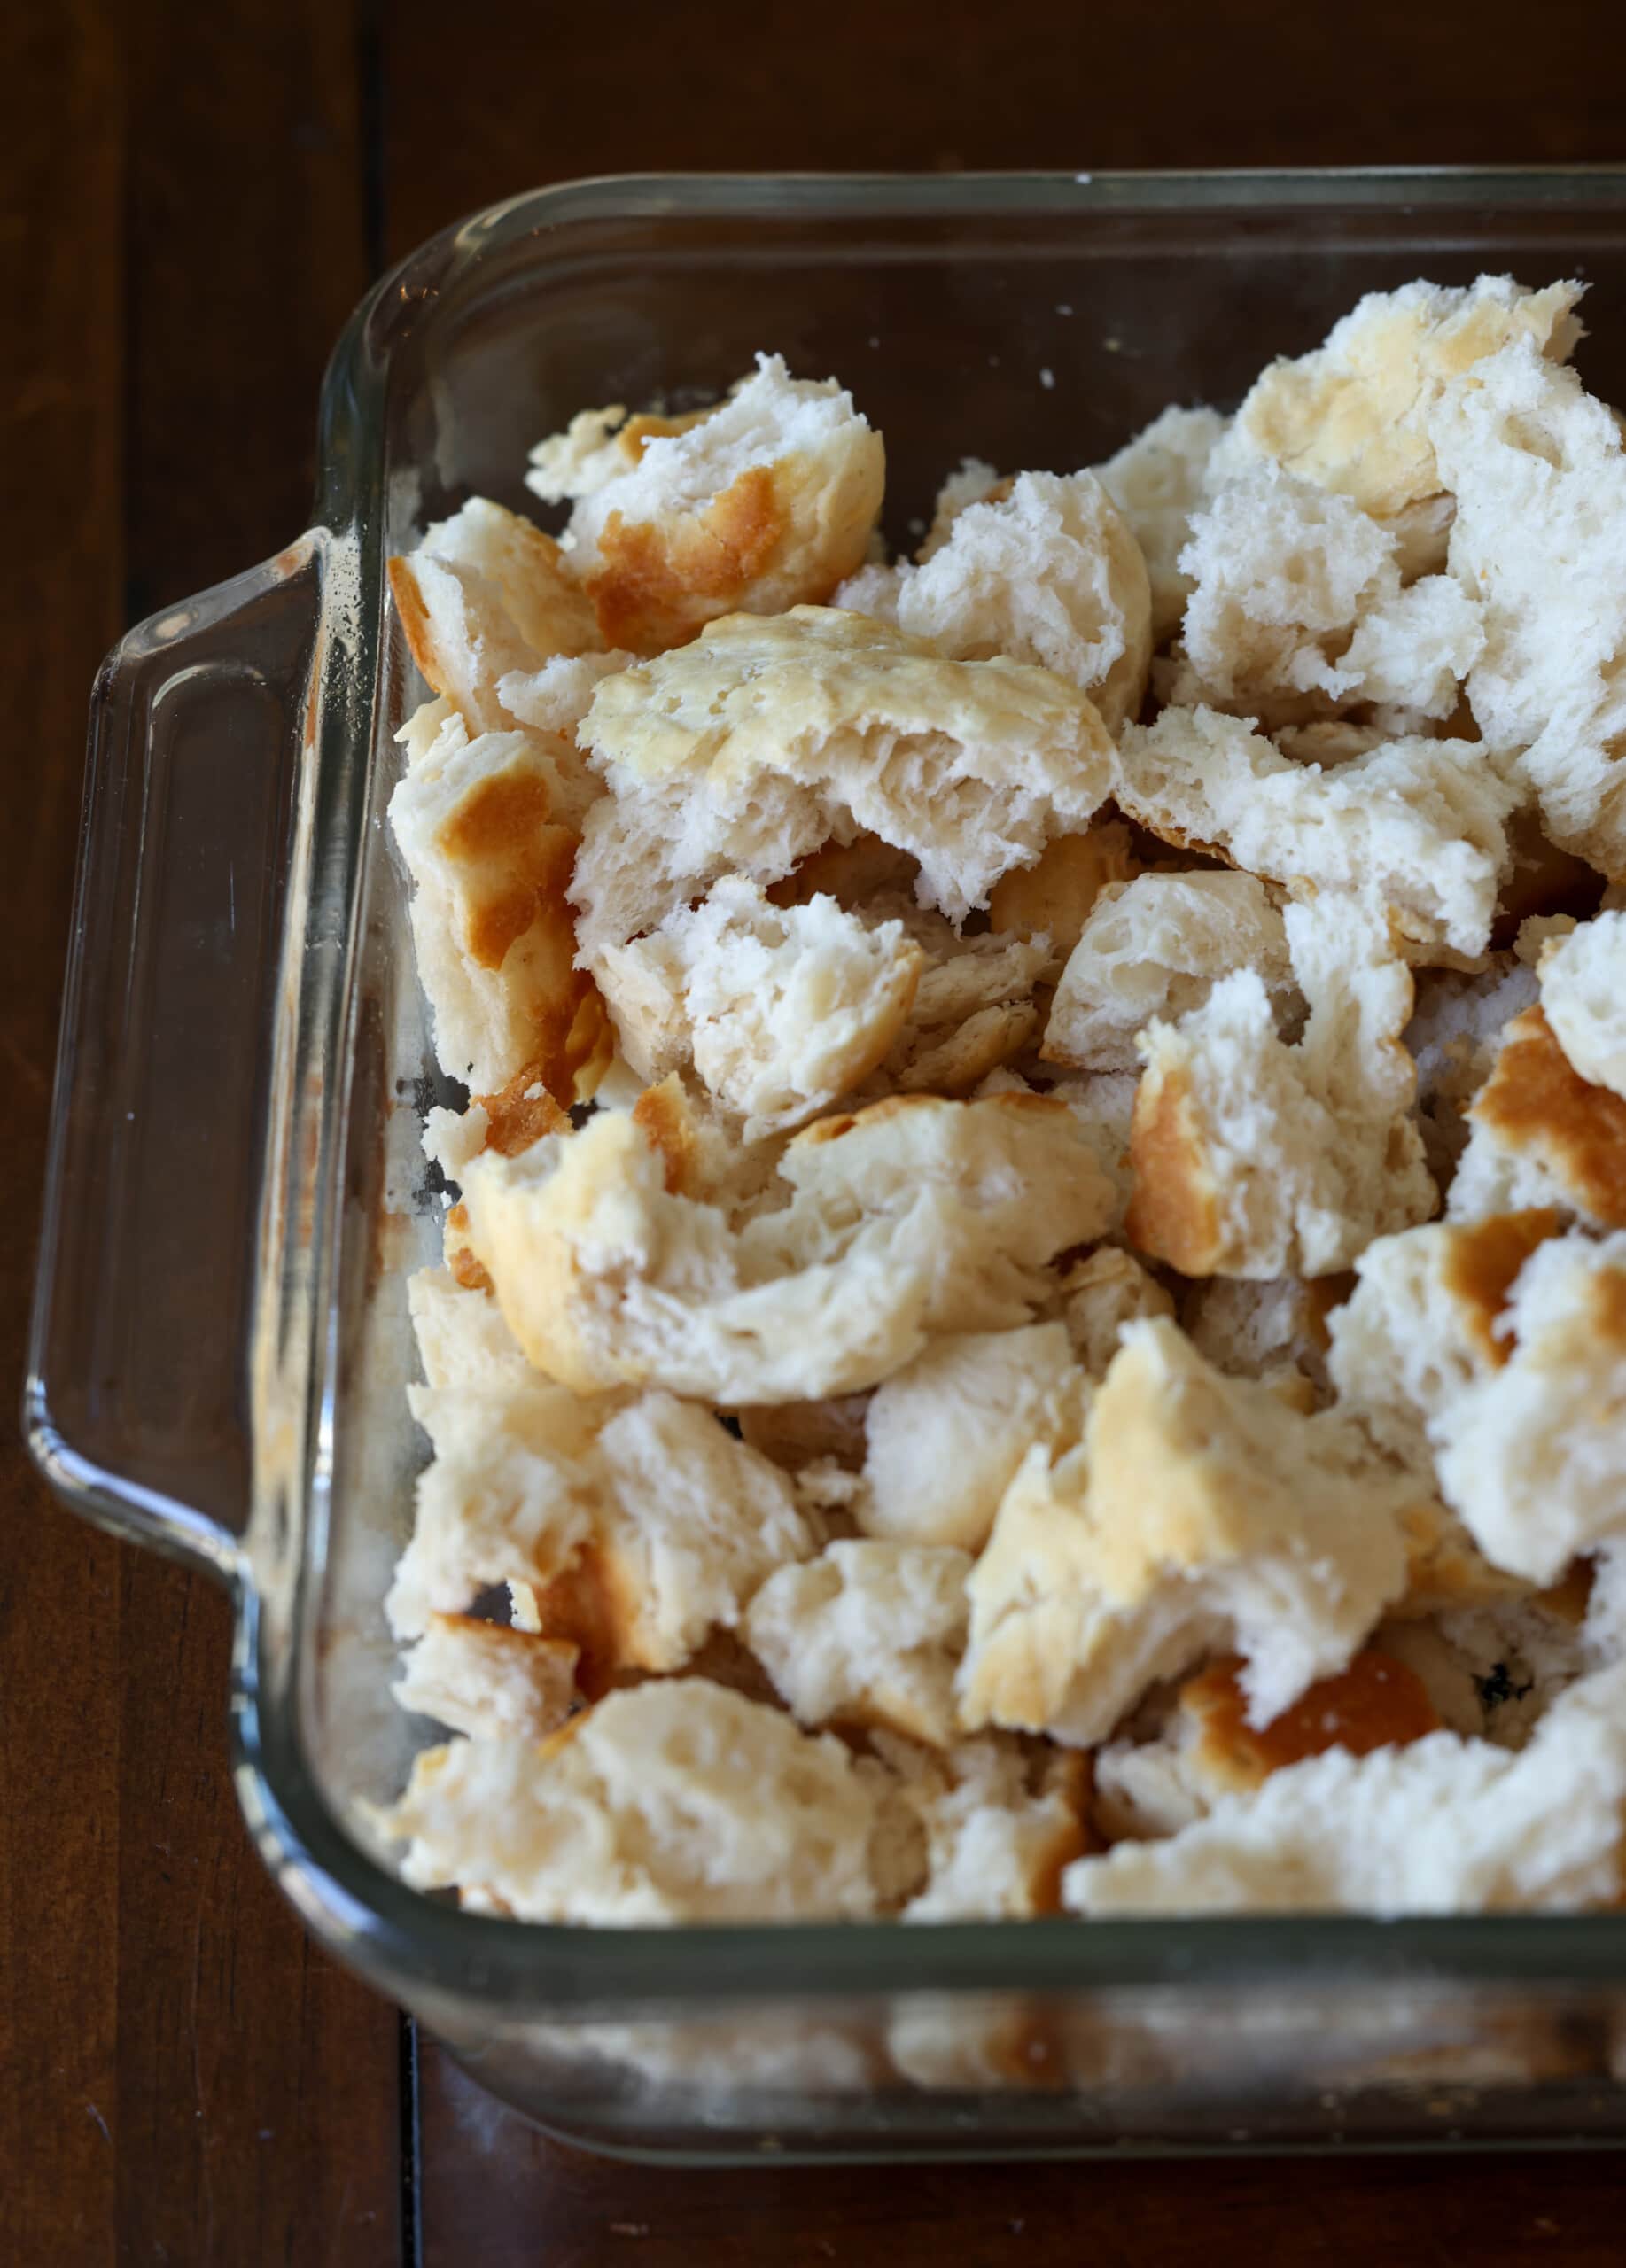 torn and crumbled day old biscuits in a 8x8 glass baking pan